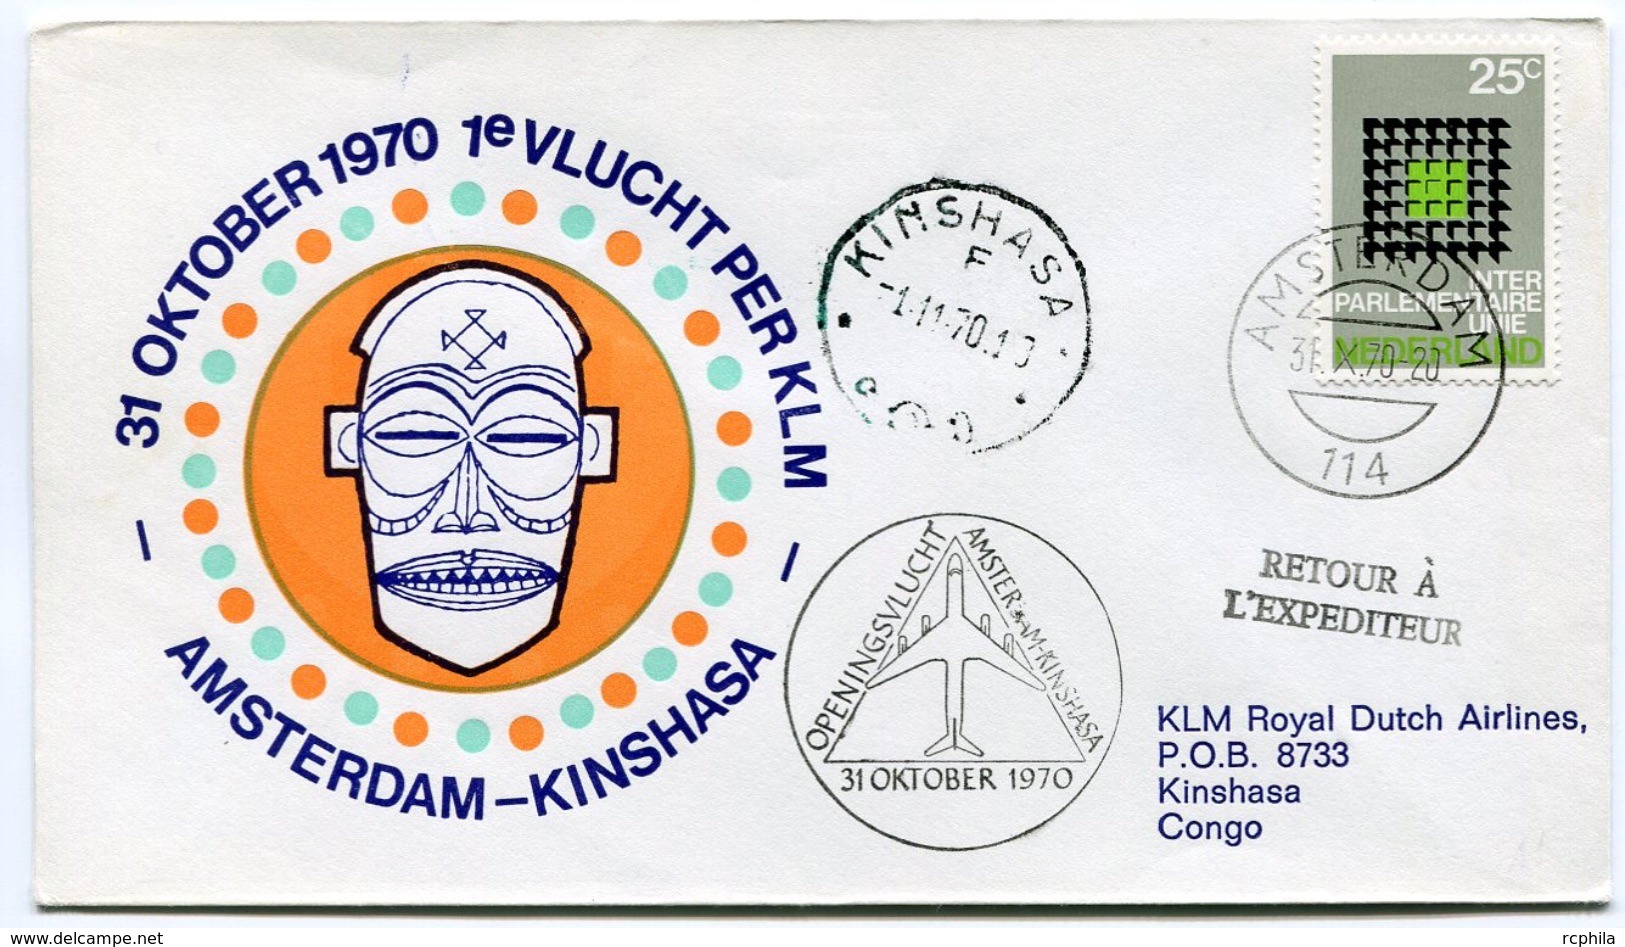 RC 6707 PAYS-BAS KLM 1970 1er VOL AMSTERDAM - KINSHASA CONGO FFC NETHERLANDS LETTRE COVER - Airmail